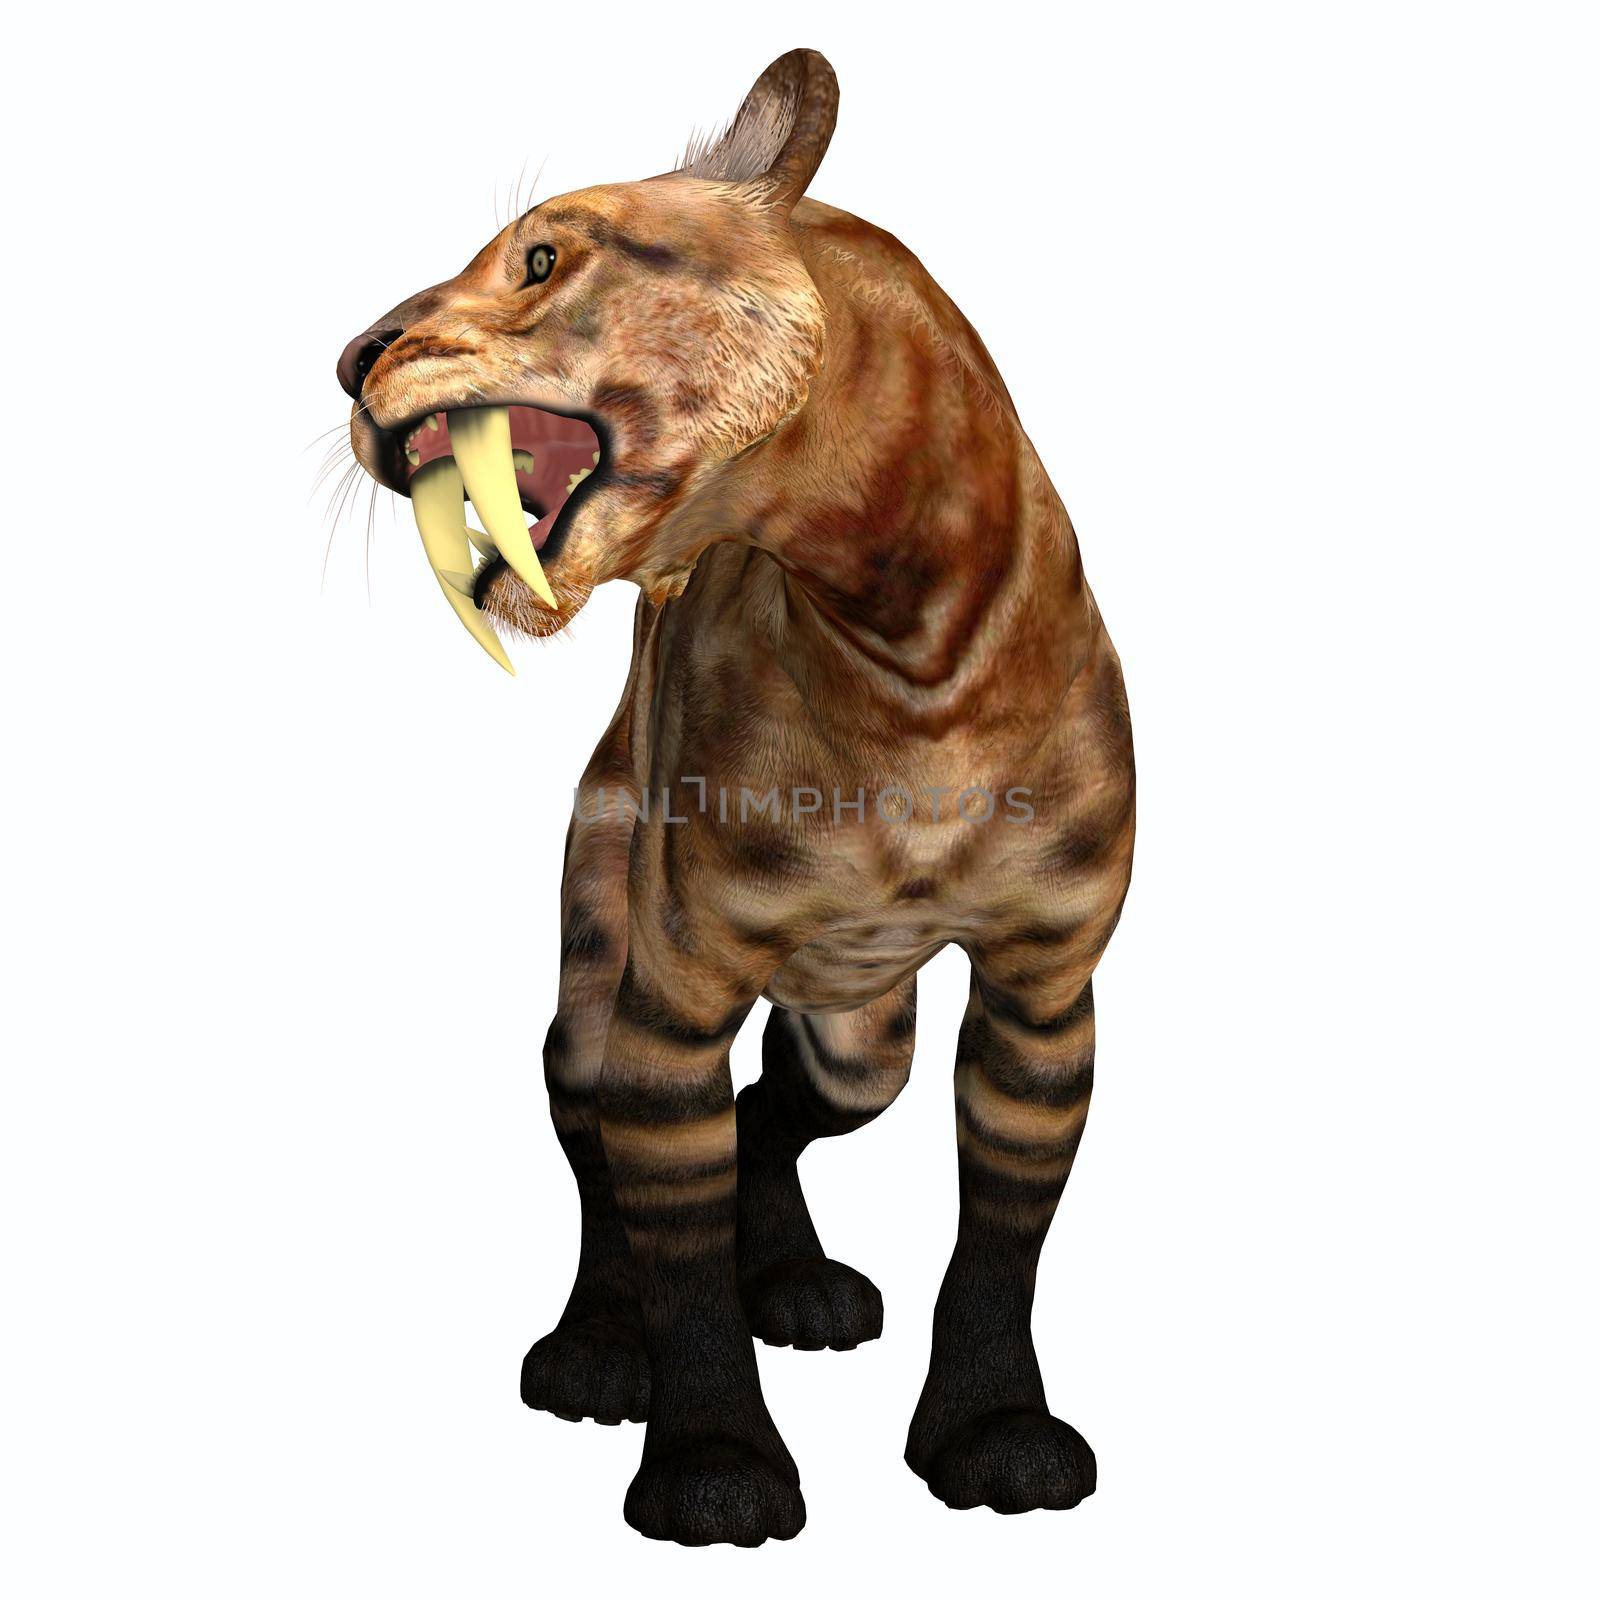 The Saber-tooth Tiger was a carnivorous cat that lived in North America during the Pleistocene, Eocene and Tertiary Periods.